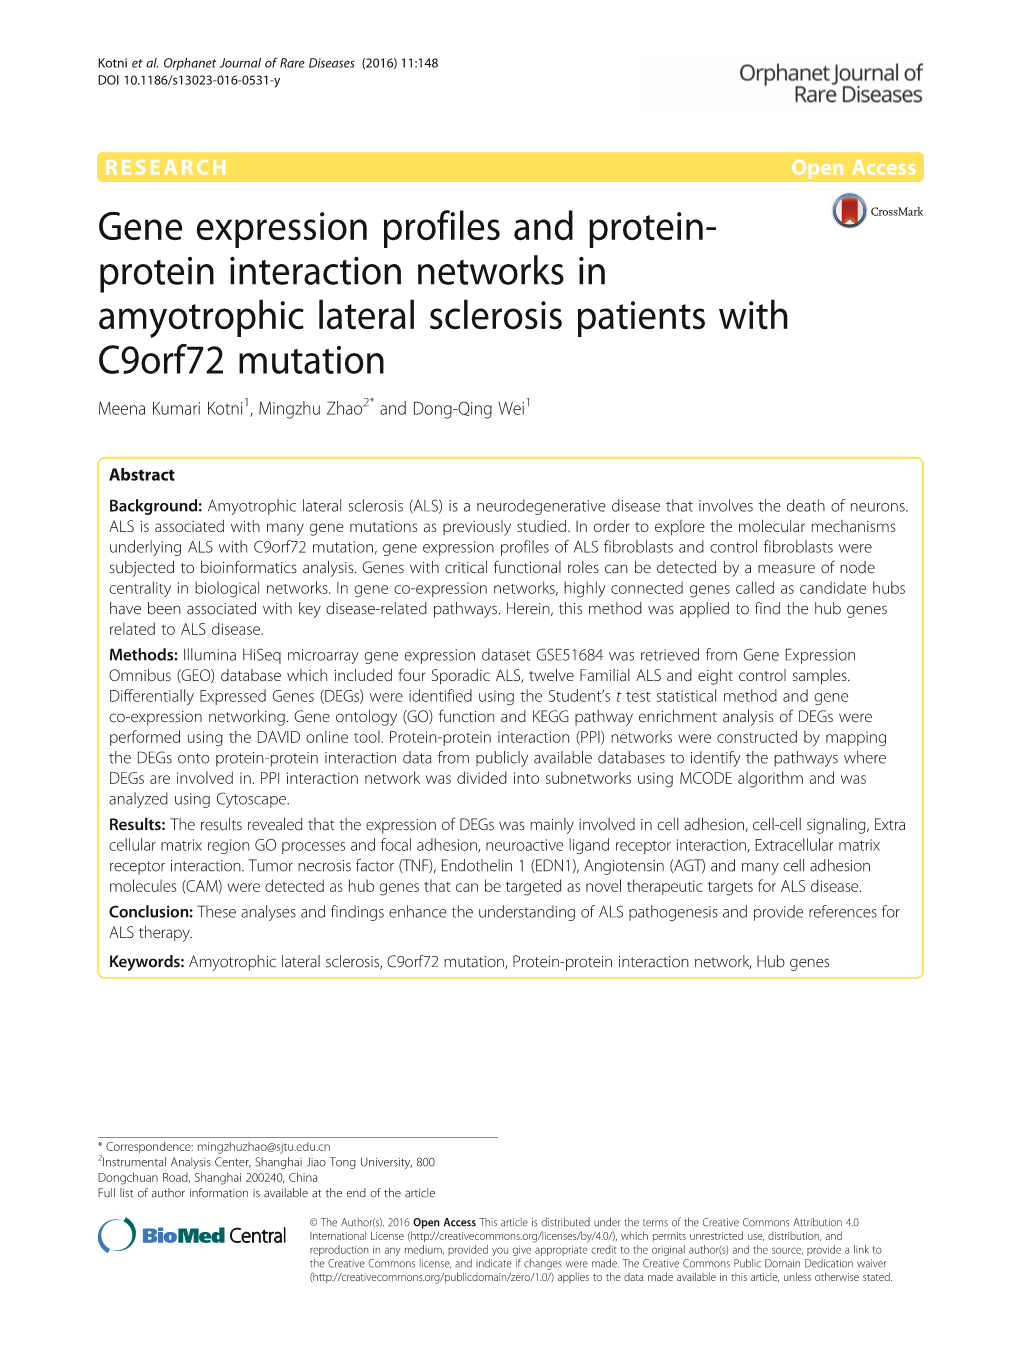 Protein Interaction Networks in Amyotrophic Lateral Sclerosis Patients with C9orf72 Mutation Meena Kumari Kotni1, Mingzhu Zhao2* and Dong-Qing Wei1